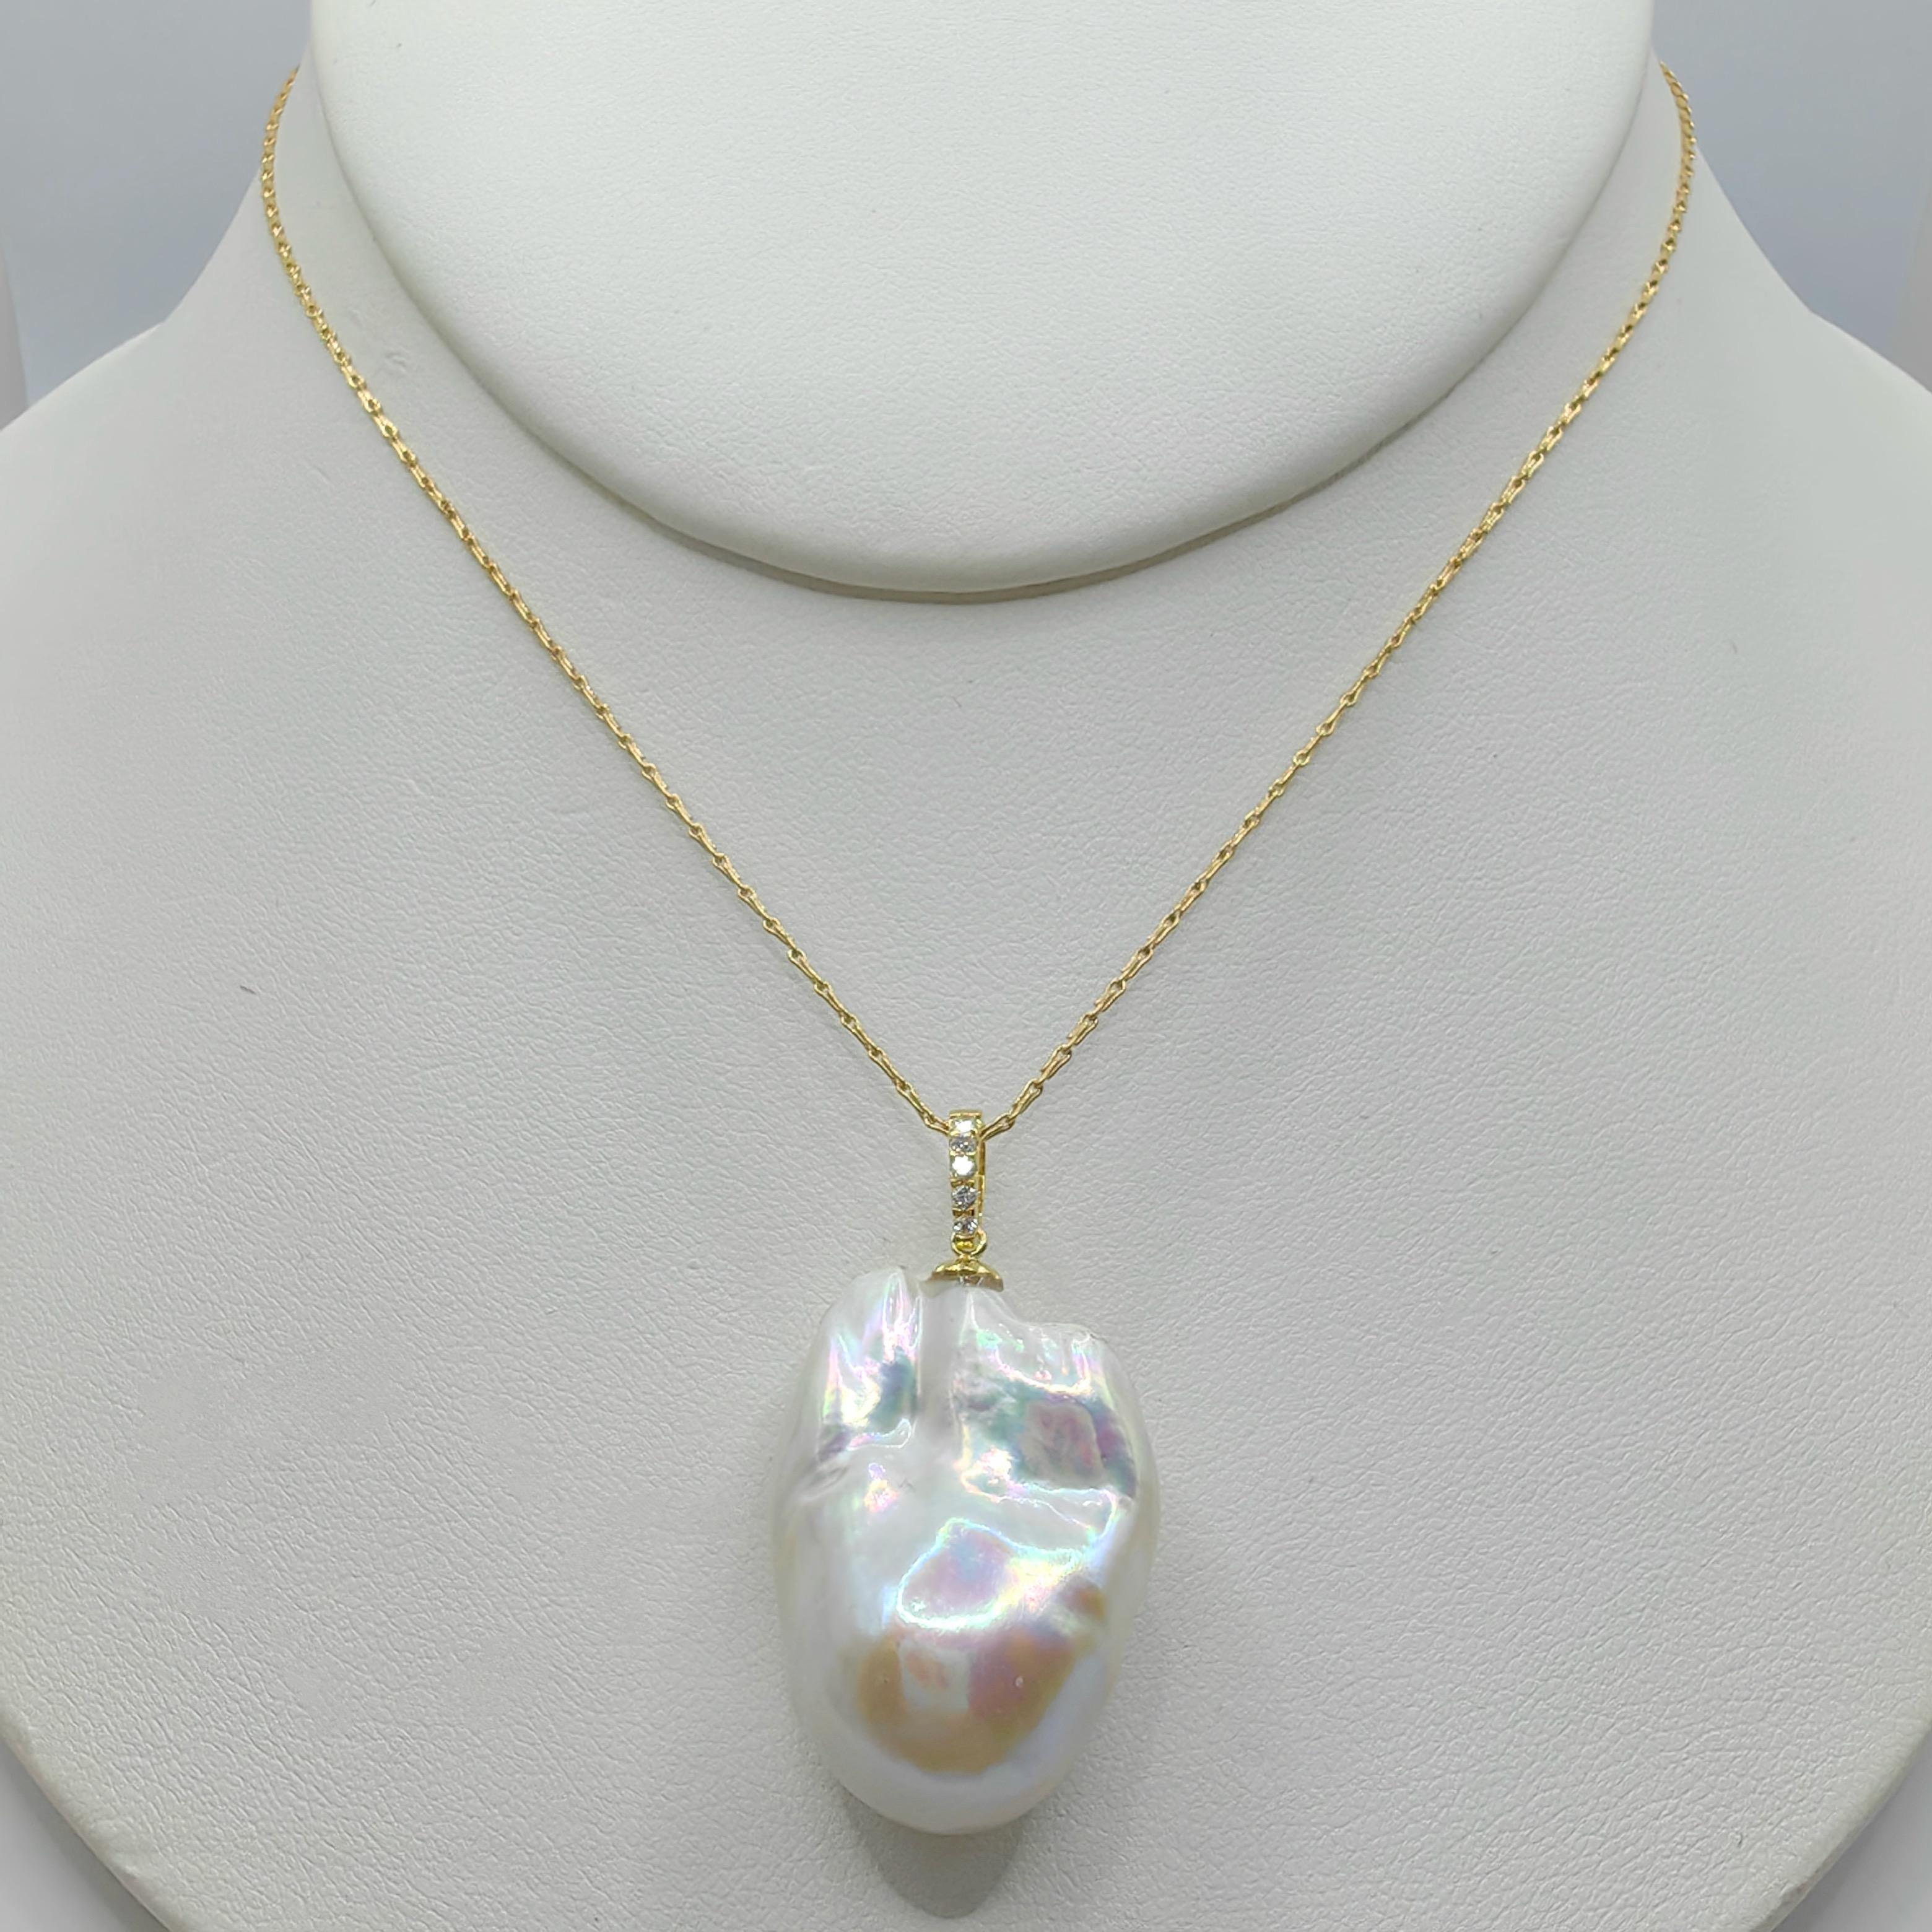 49.24ct Large Iridescent Baroque Pearl Diamond 18K Yellow Gold Necklace Pendant For Sale 3